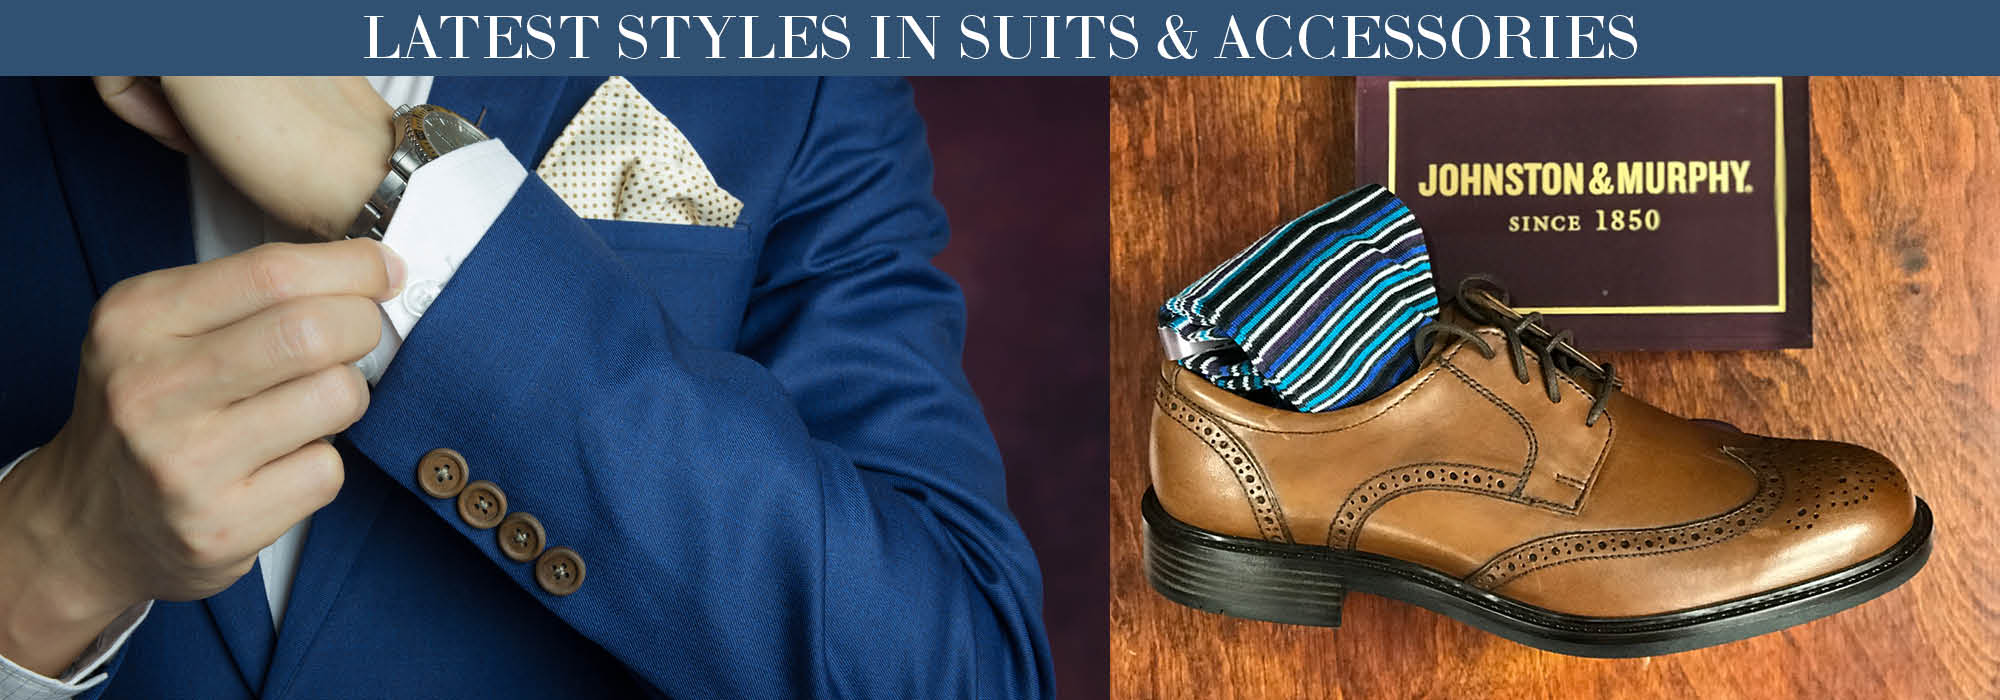 Latest Styles in Suits and Accessories